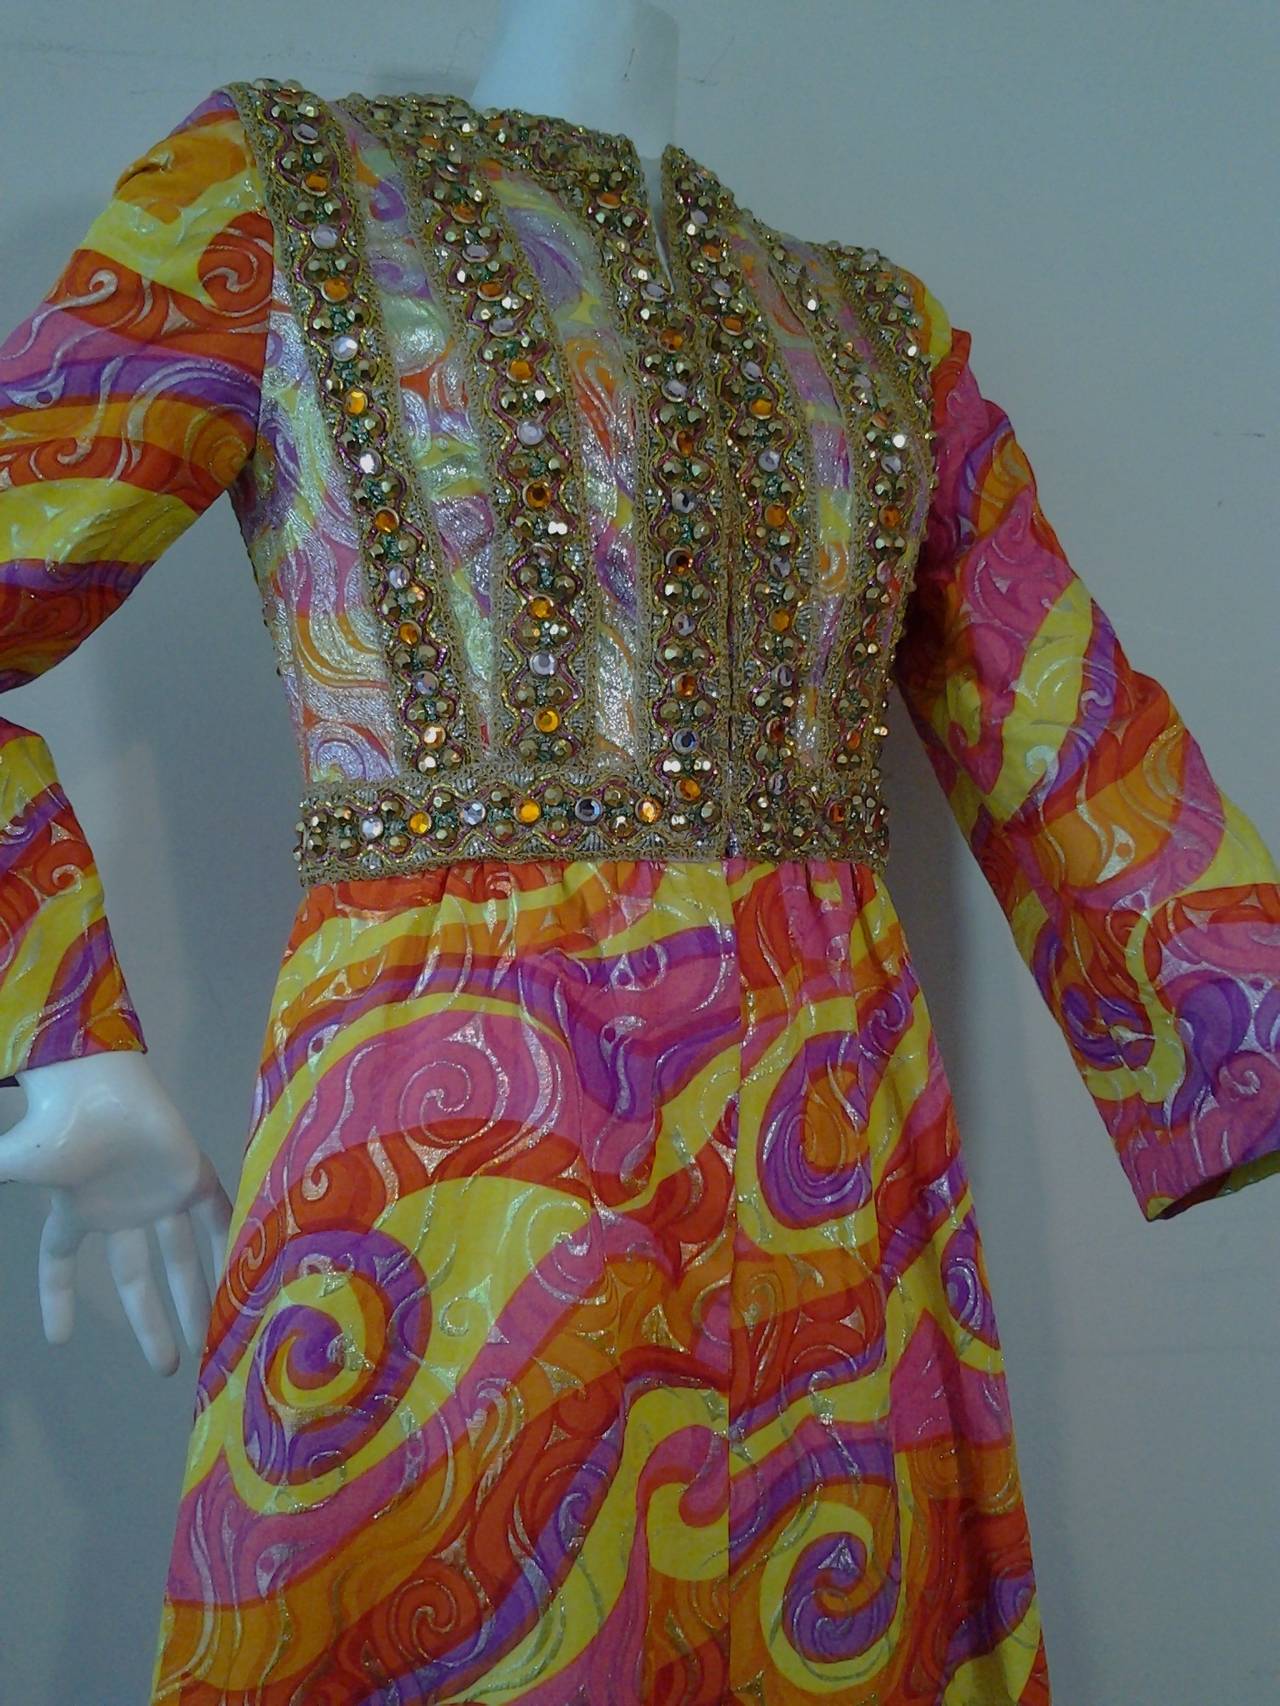 A fabulous 1960s Oscar de La Renta print lame brocade gown from I. Magnin.  Oscar label is gone.  Asian-inspired psychedelic wave print with heavily jeweled bodice.  Fully lined in yellow silk with 2 side slit pockets.  Snap and hook front closure.